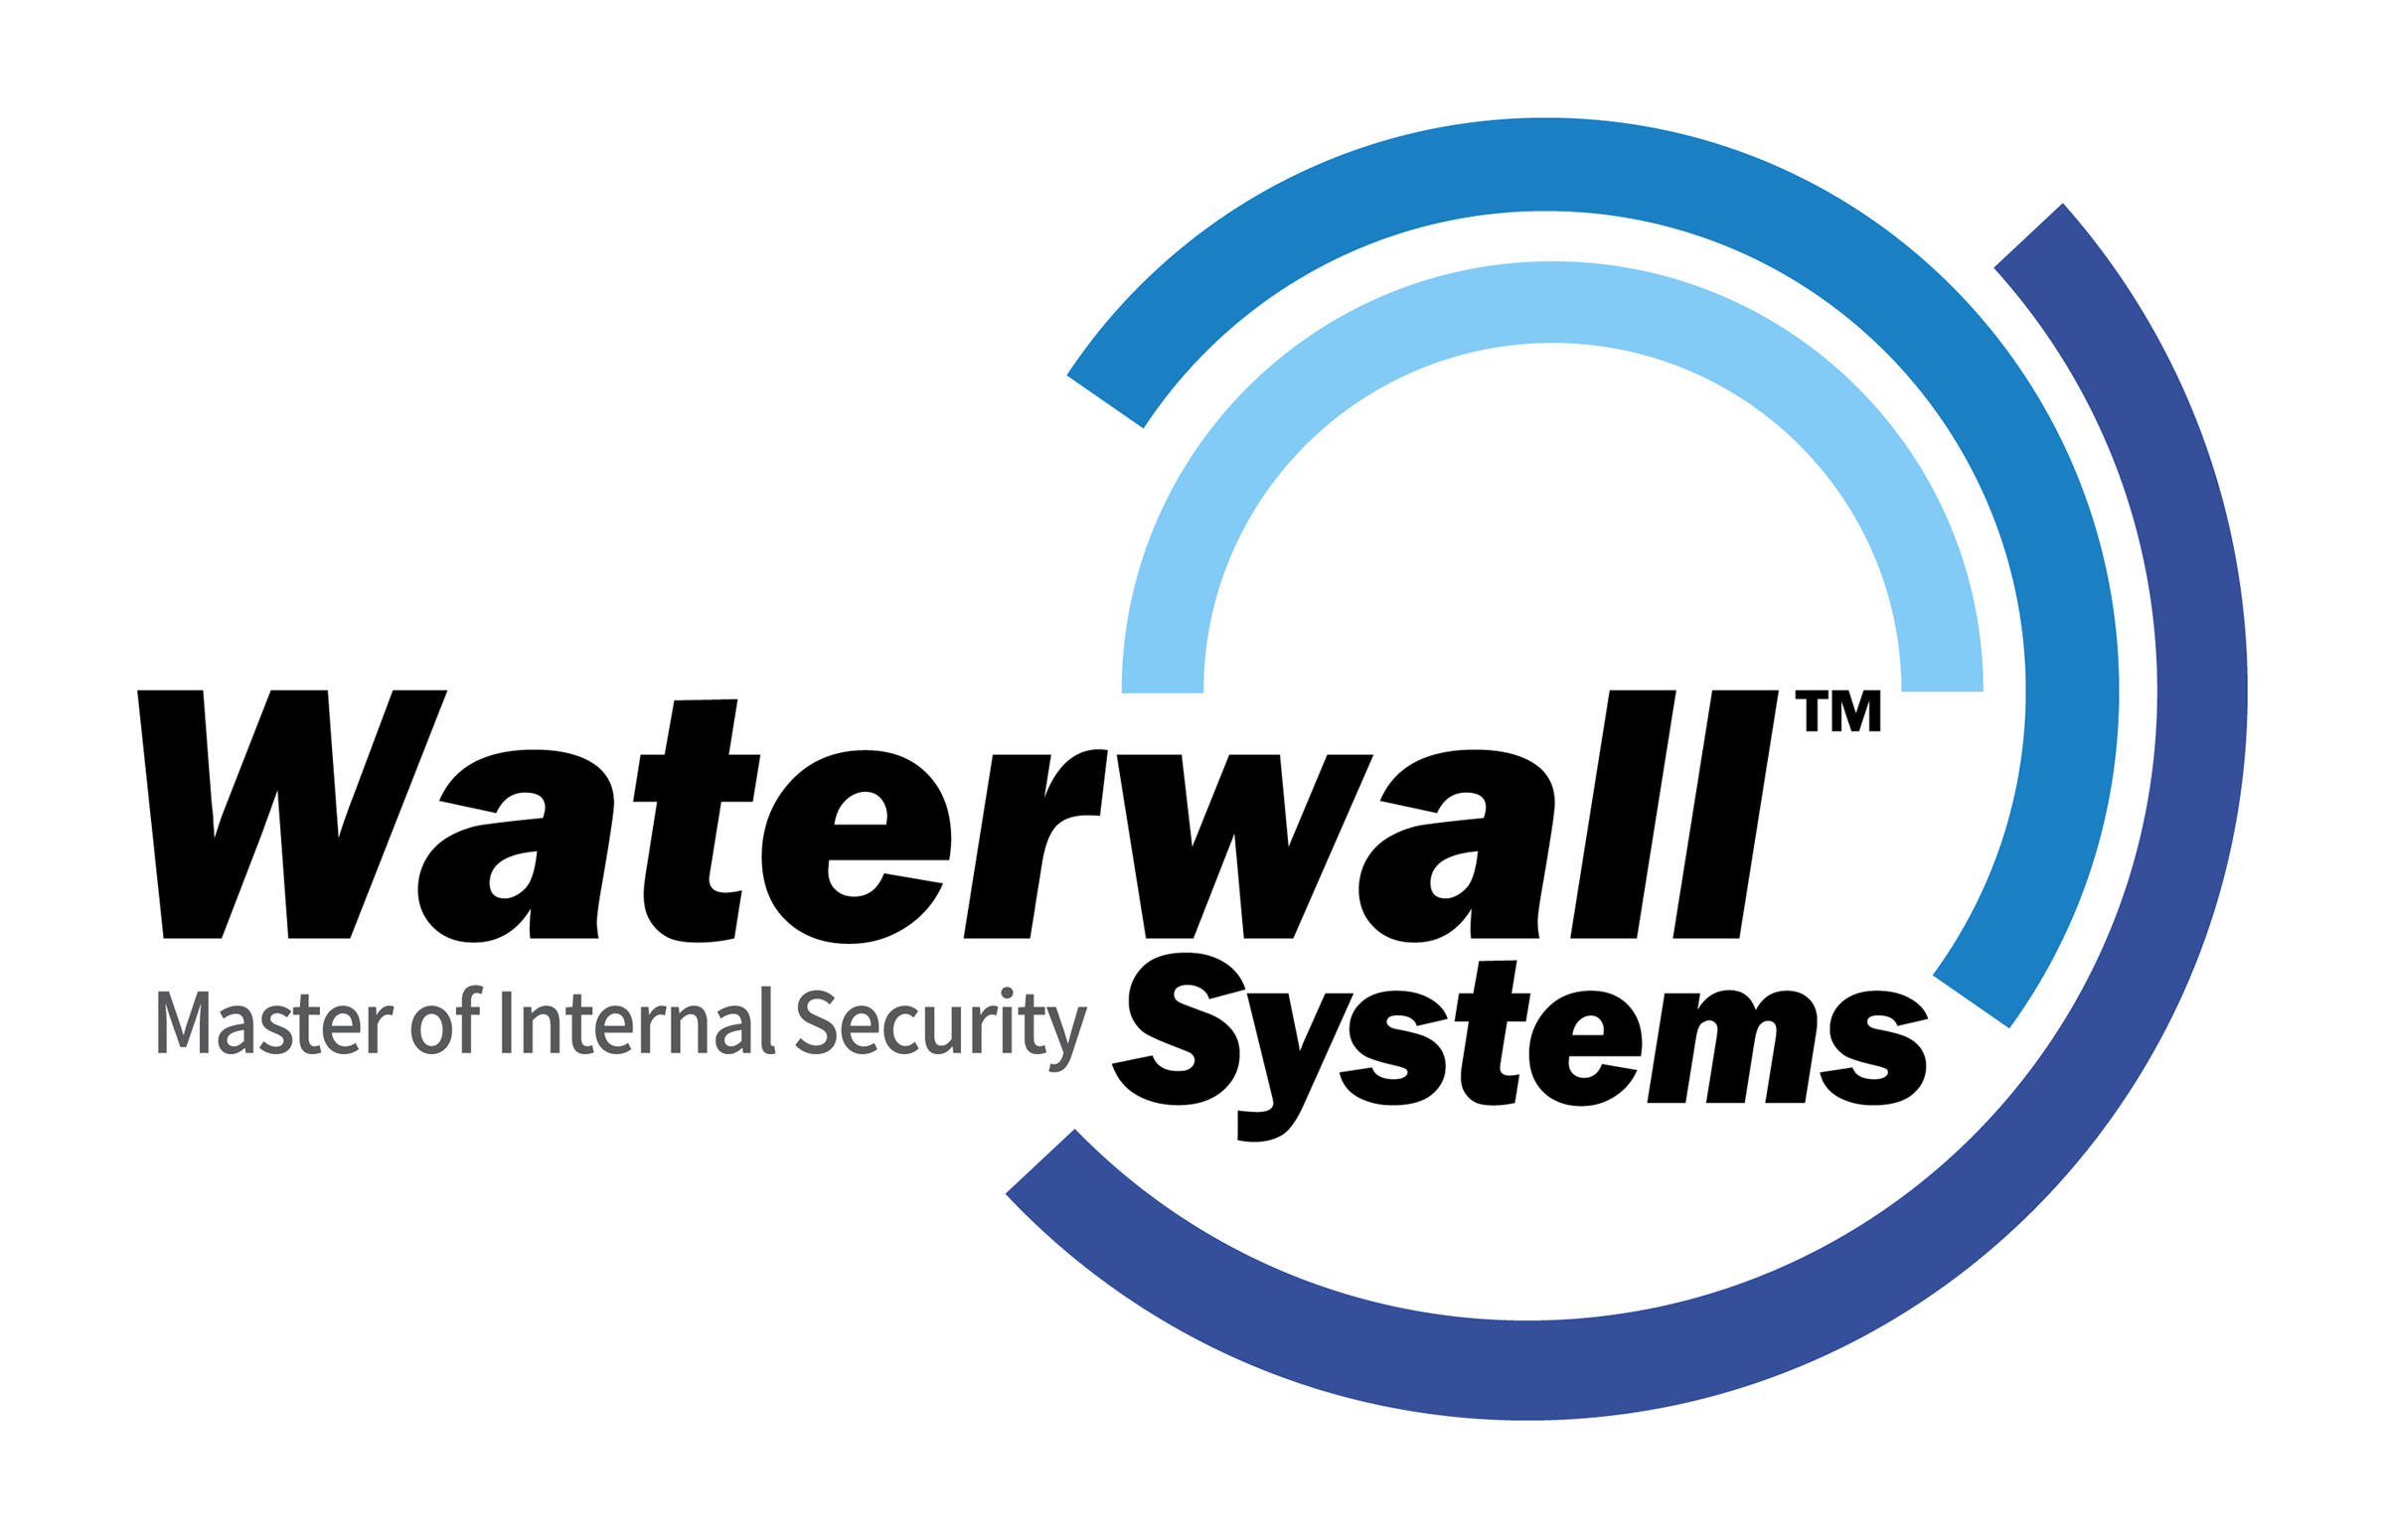 Waterwall Systems